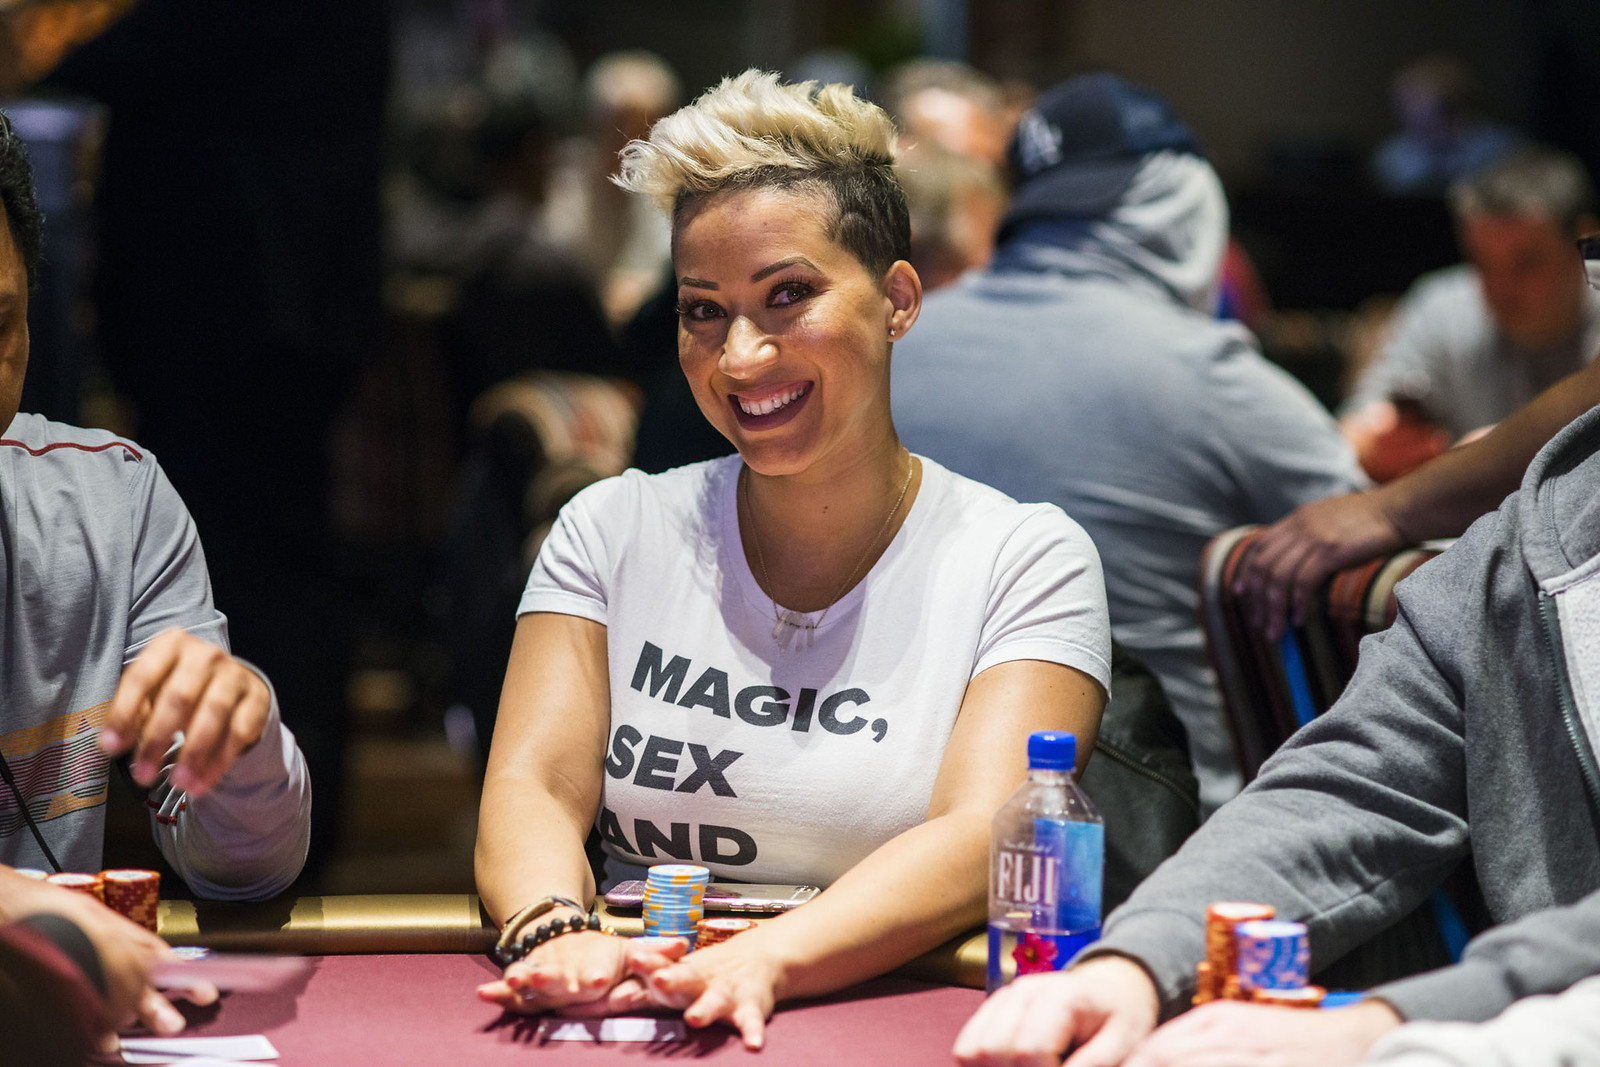 Ebony Kenney Tops Field of Poker Pros and Celebrities in Feeding America Charity Tournament